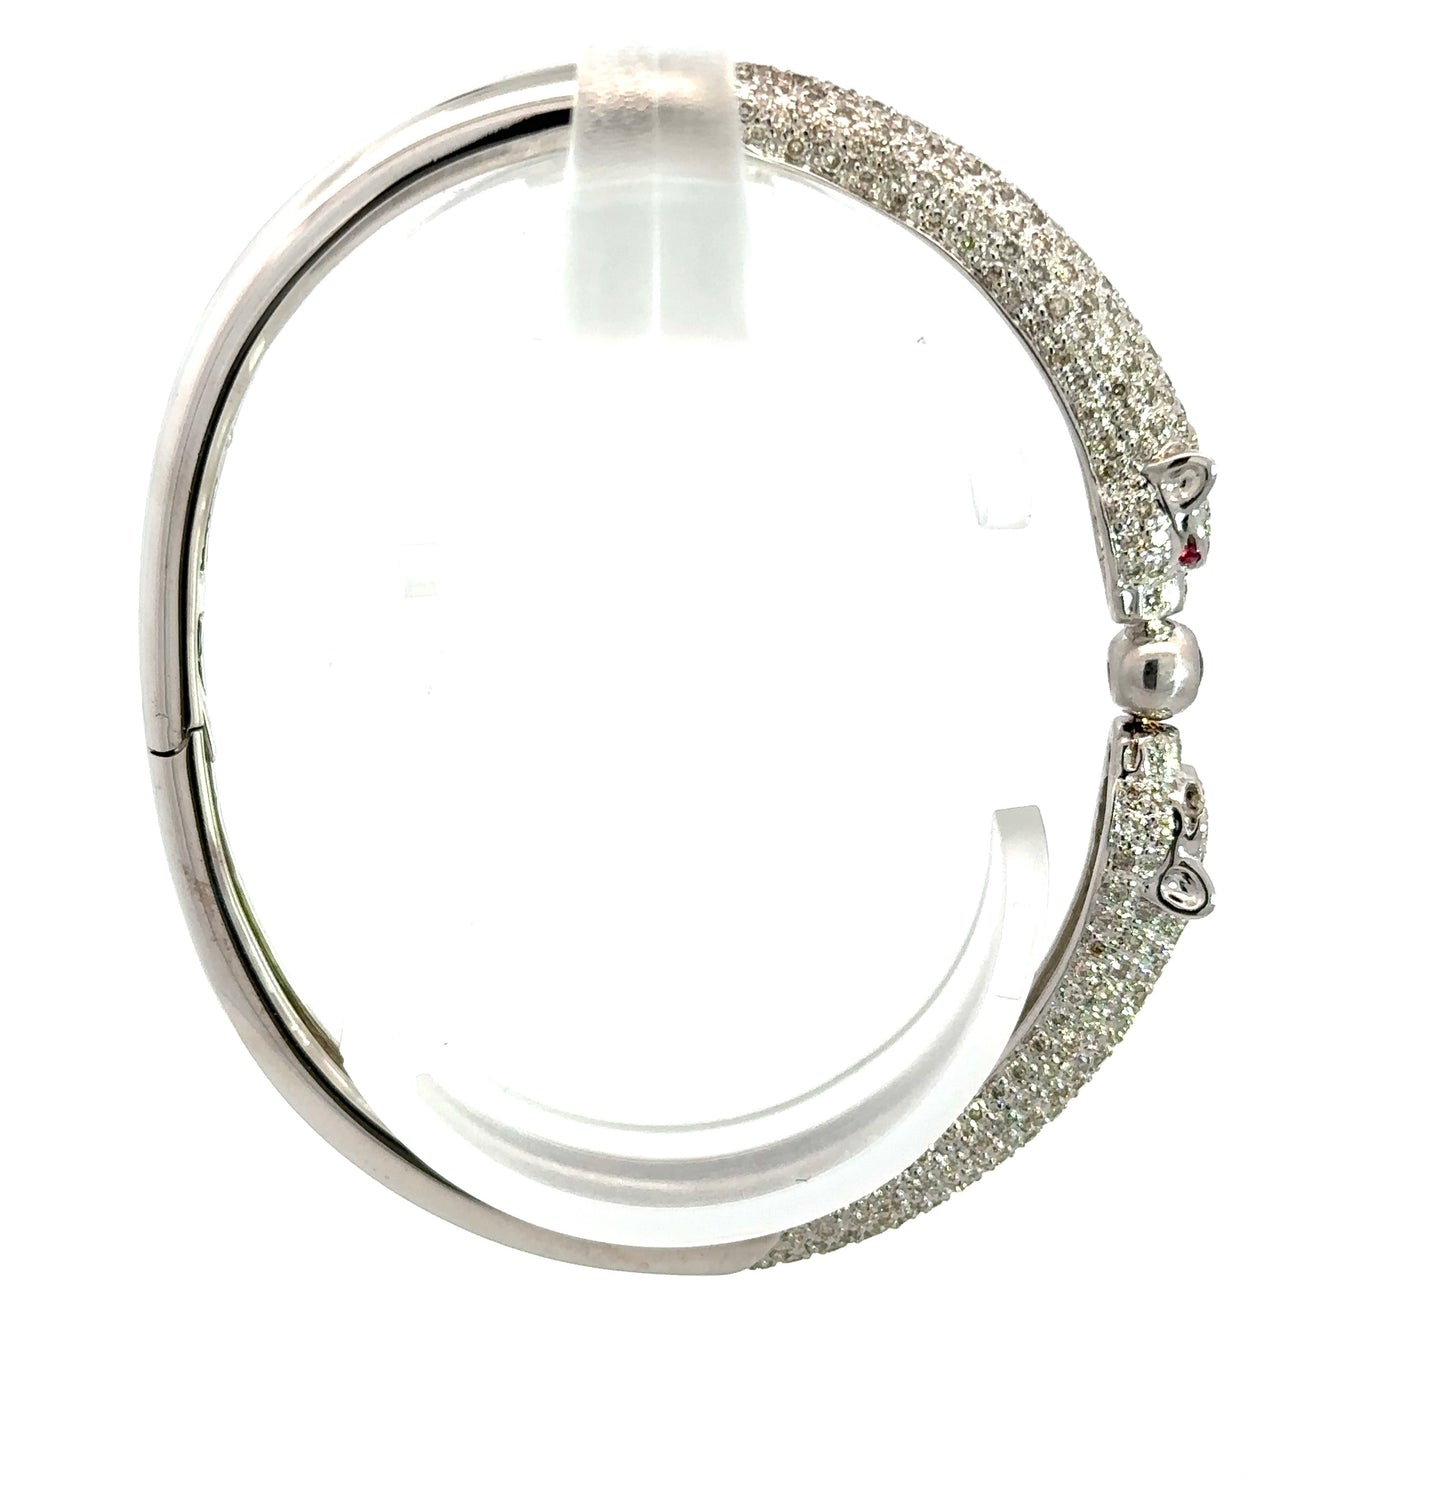 Side of white gold bangle bracelet with 2 panthers and diamonds on the panthers